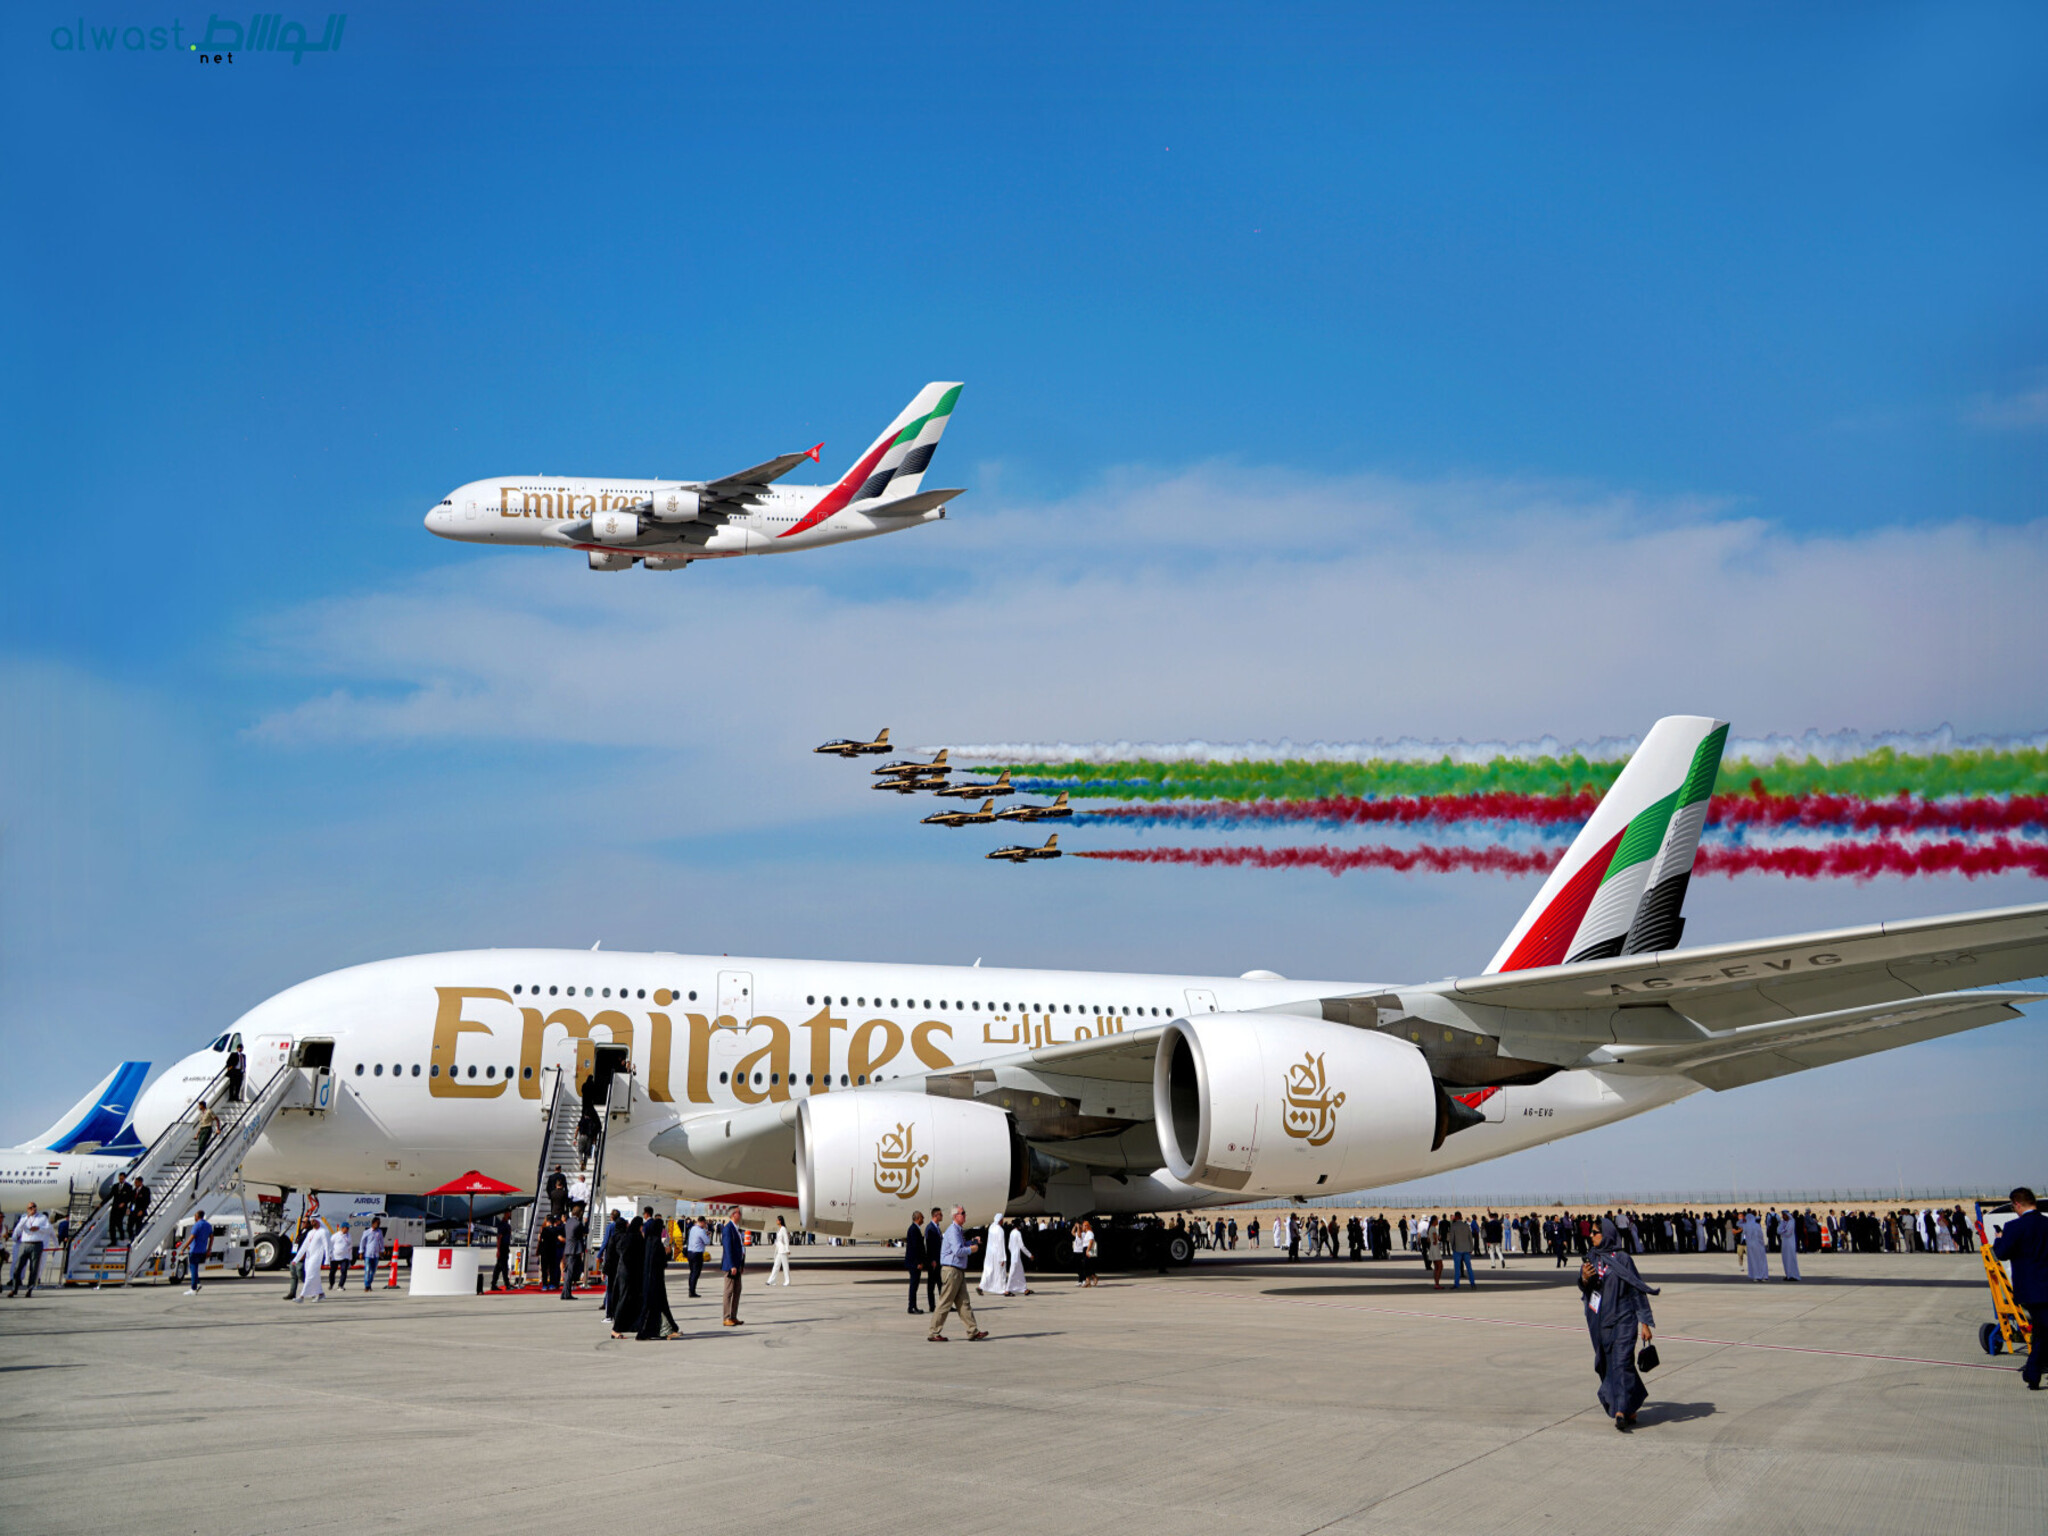 Dubai Emirates settles $1.5 million US fine for operating in prohibited airspace